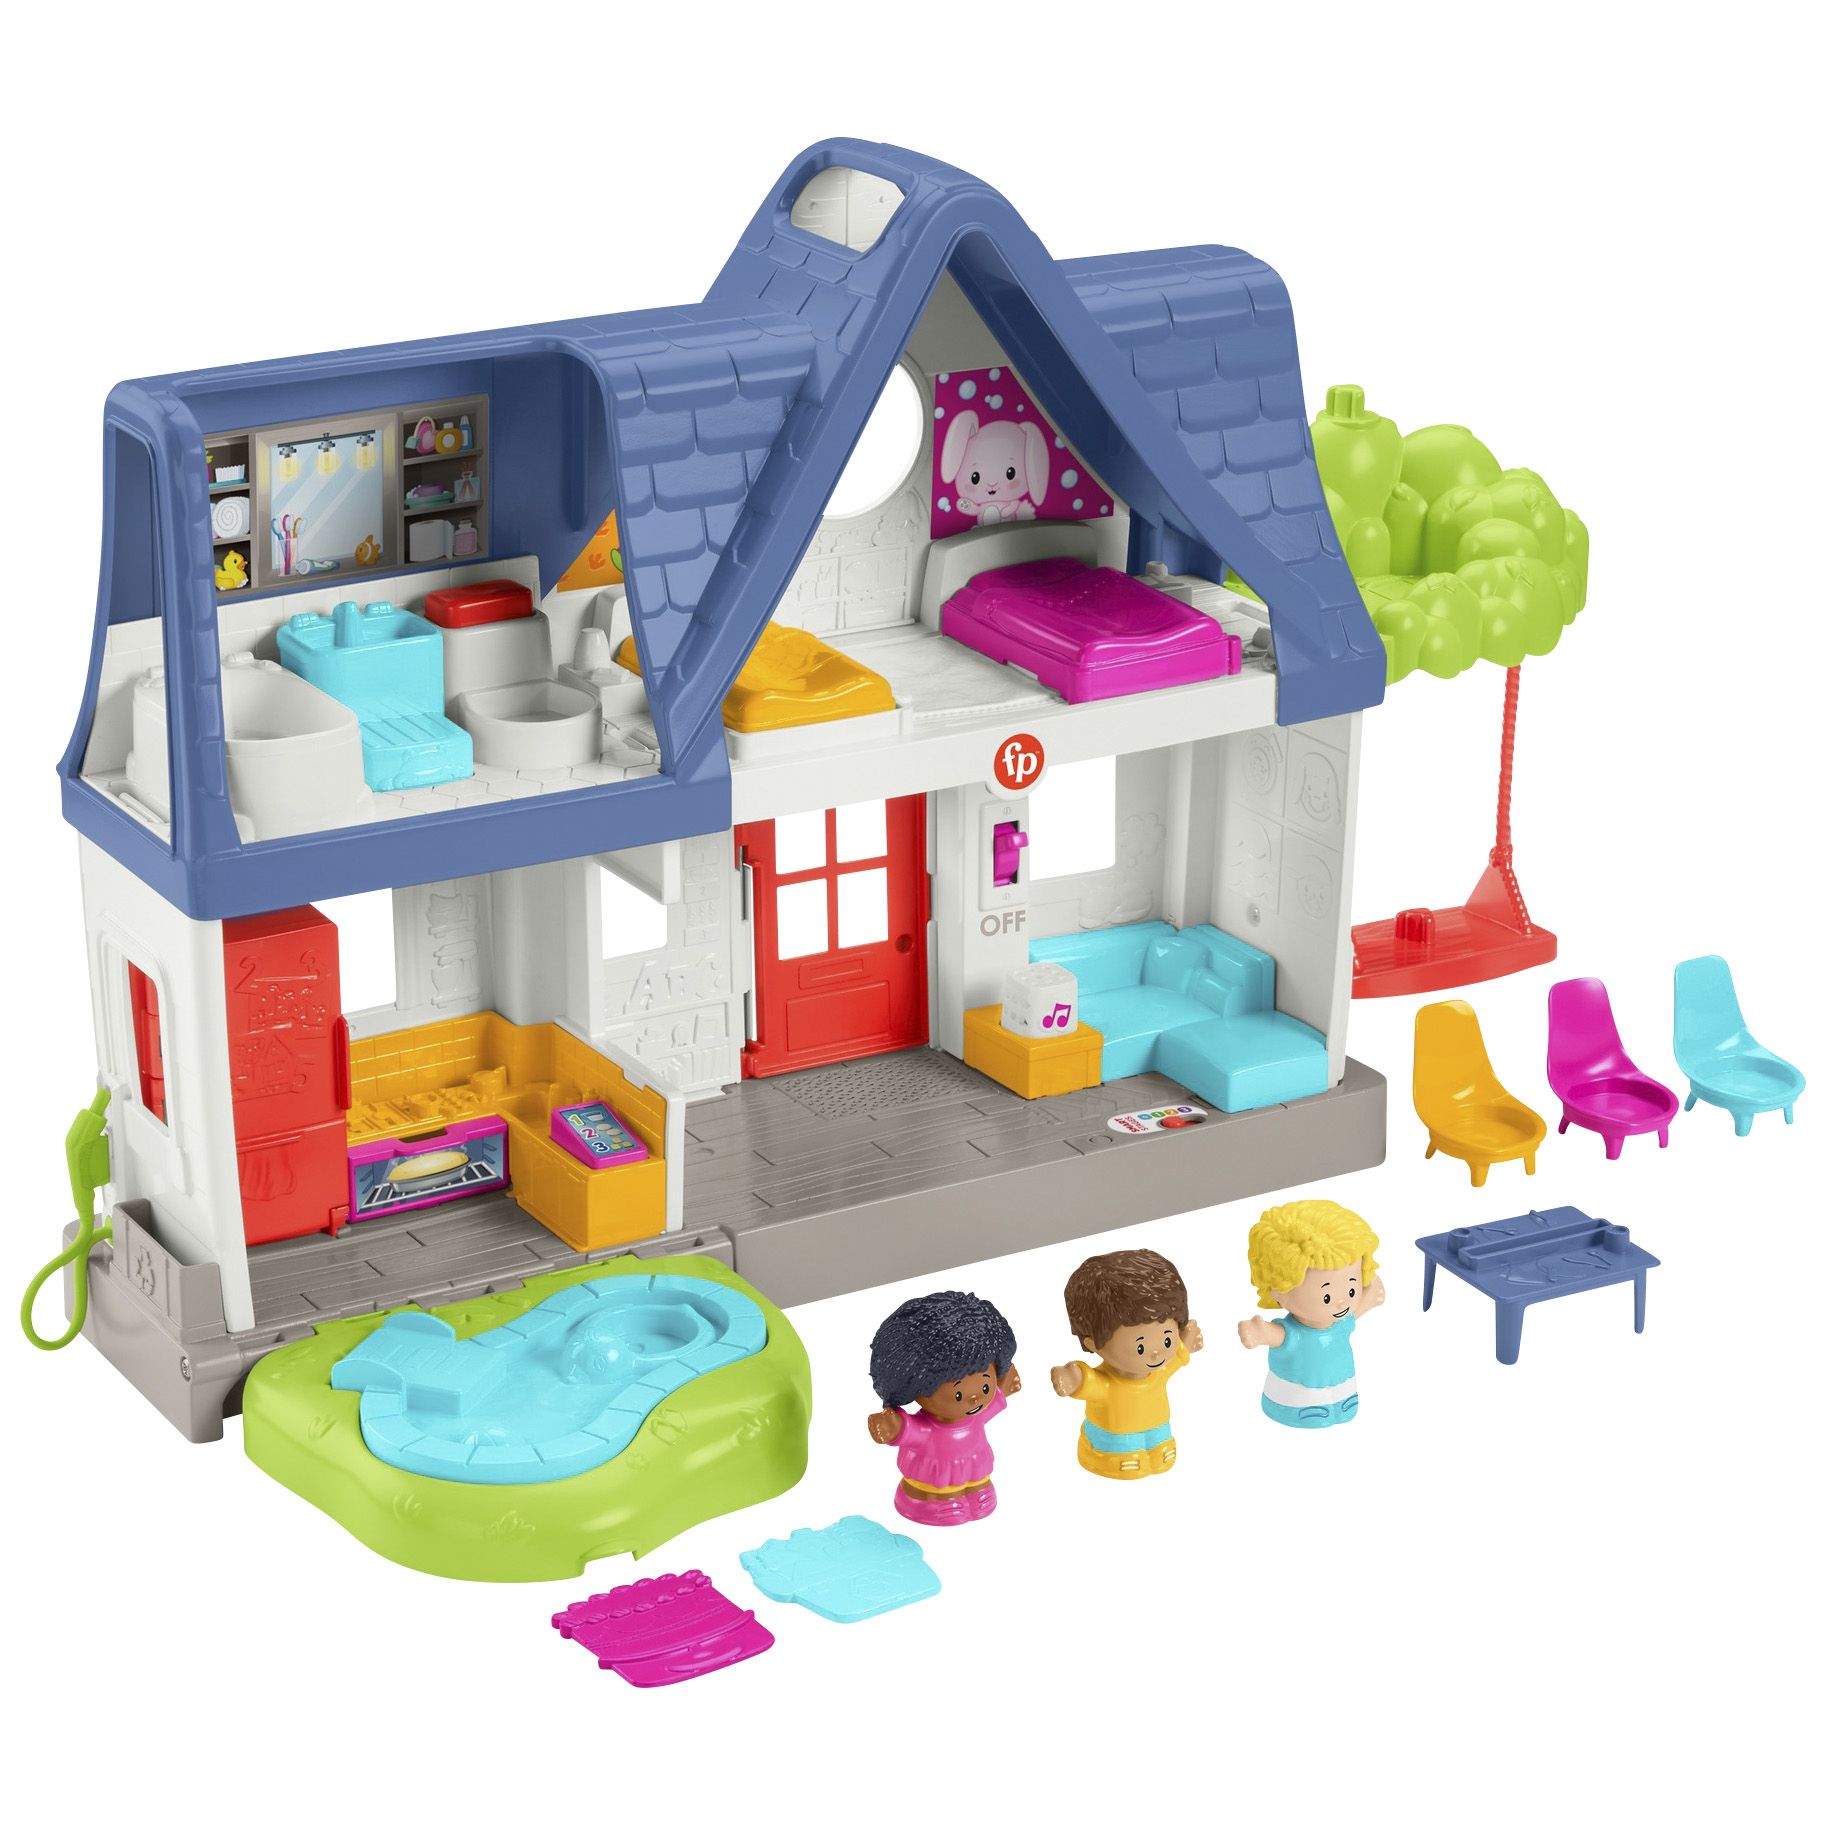 Fisher-Price Little People Friends Together Play House Playset